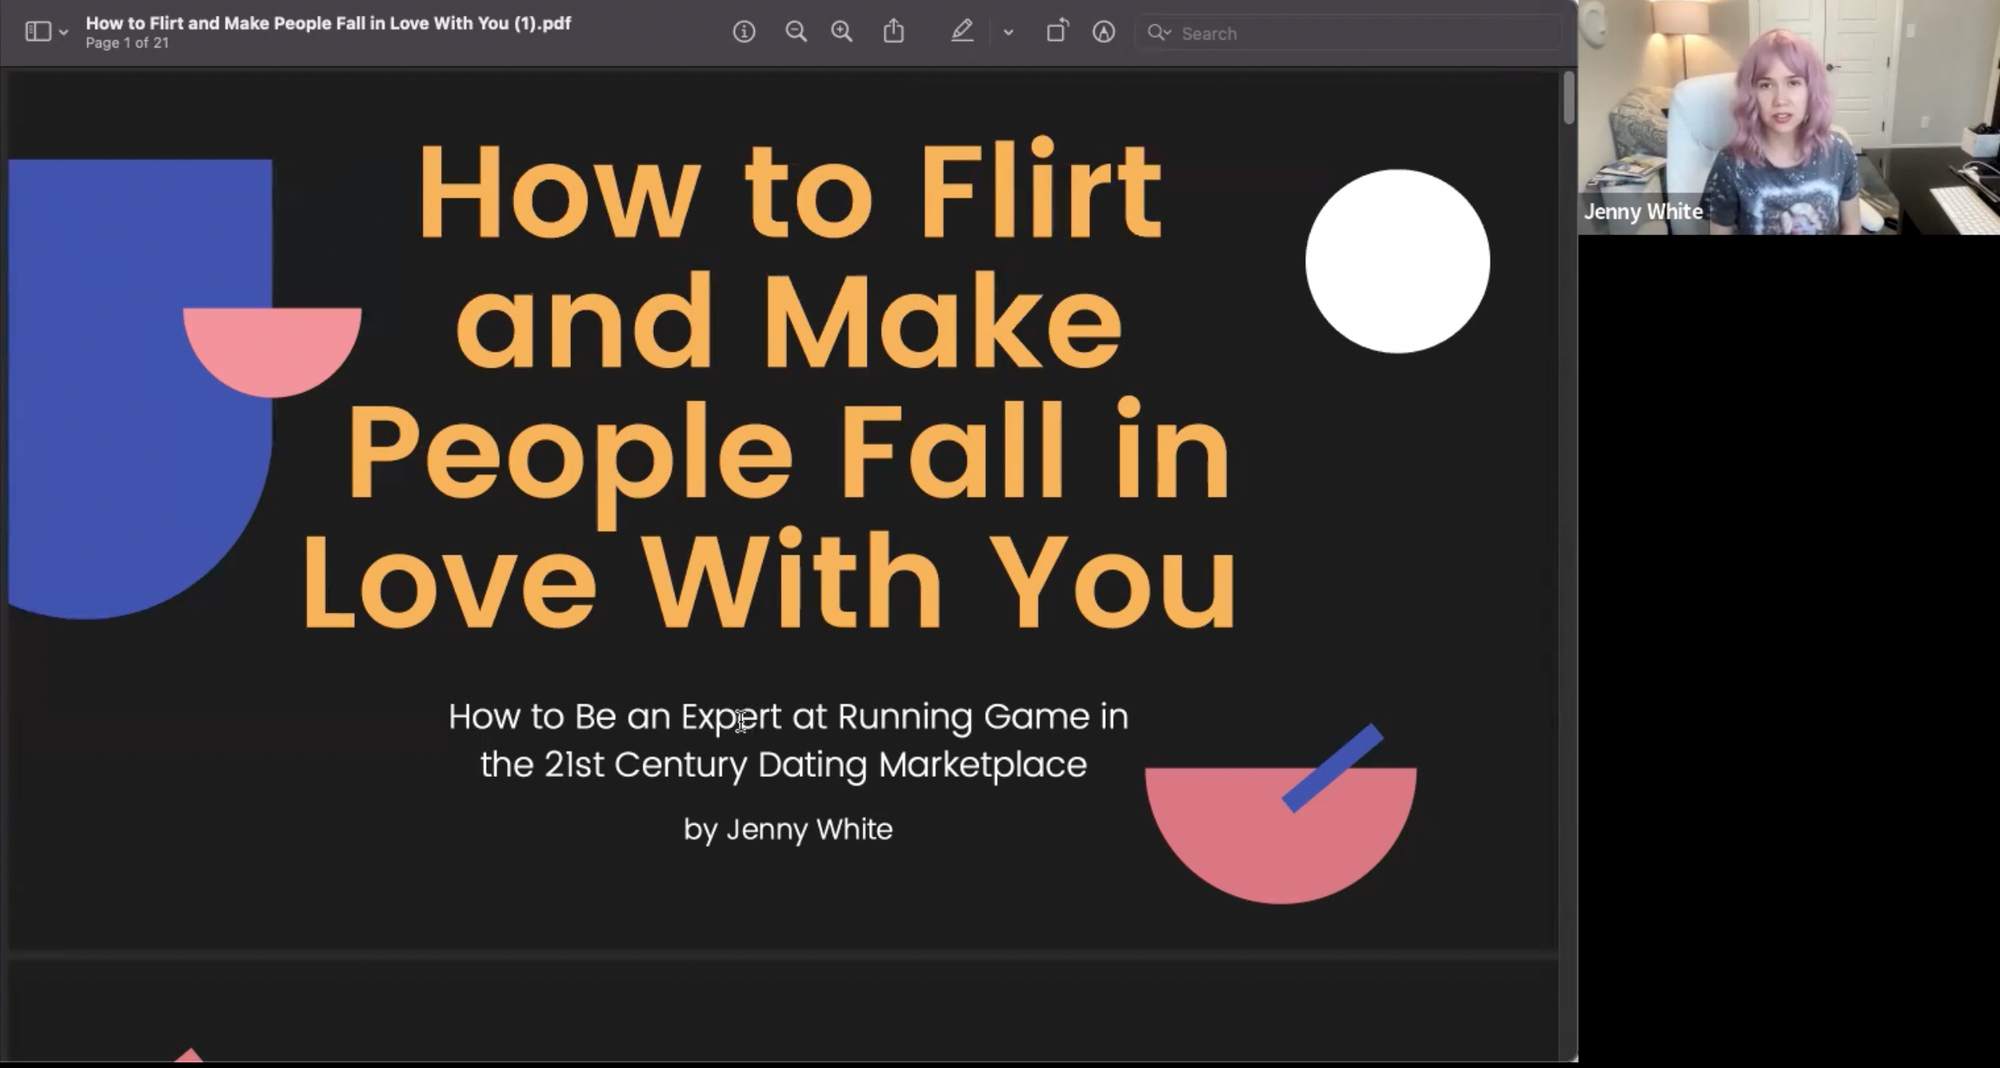 How to flirting and make people fall in love with you course